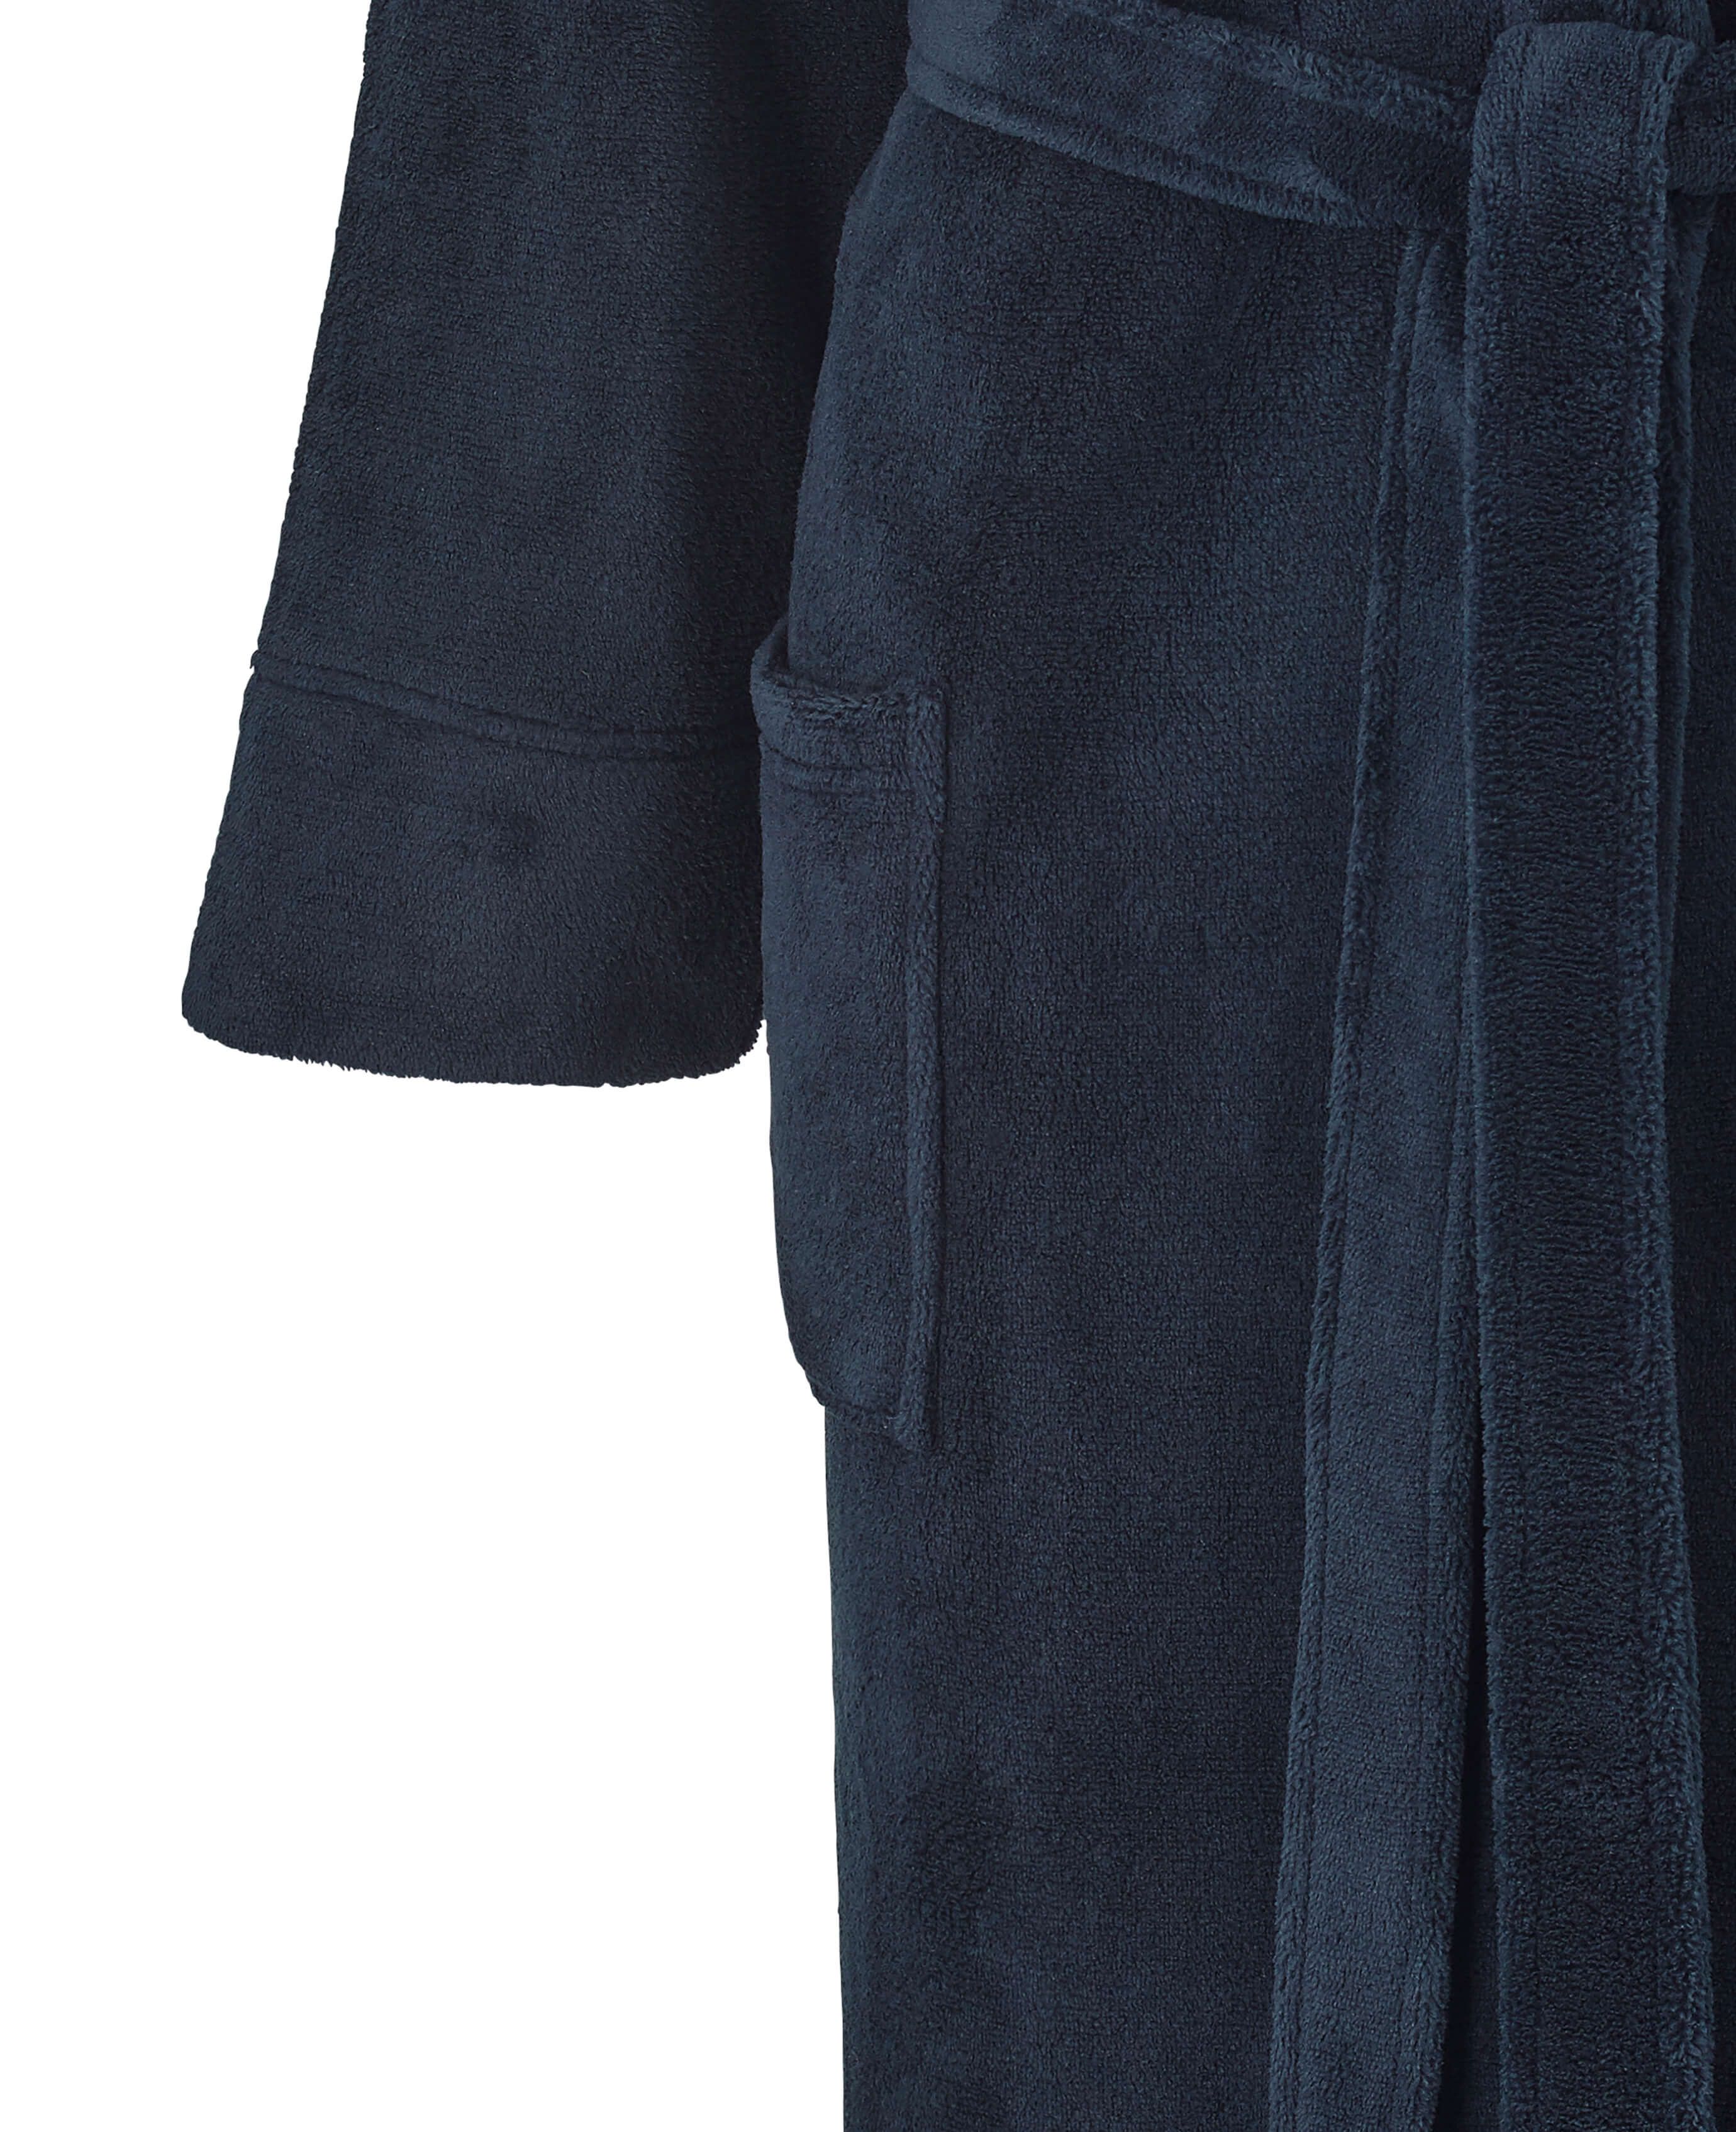 Women's luxury navy soft fleece dressing gown with pockets